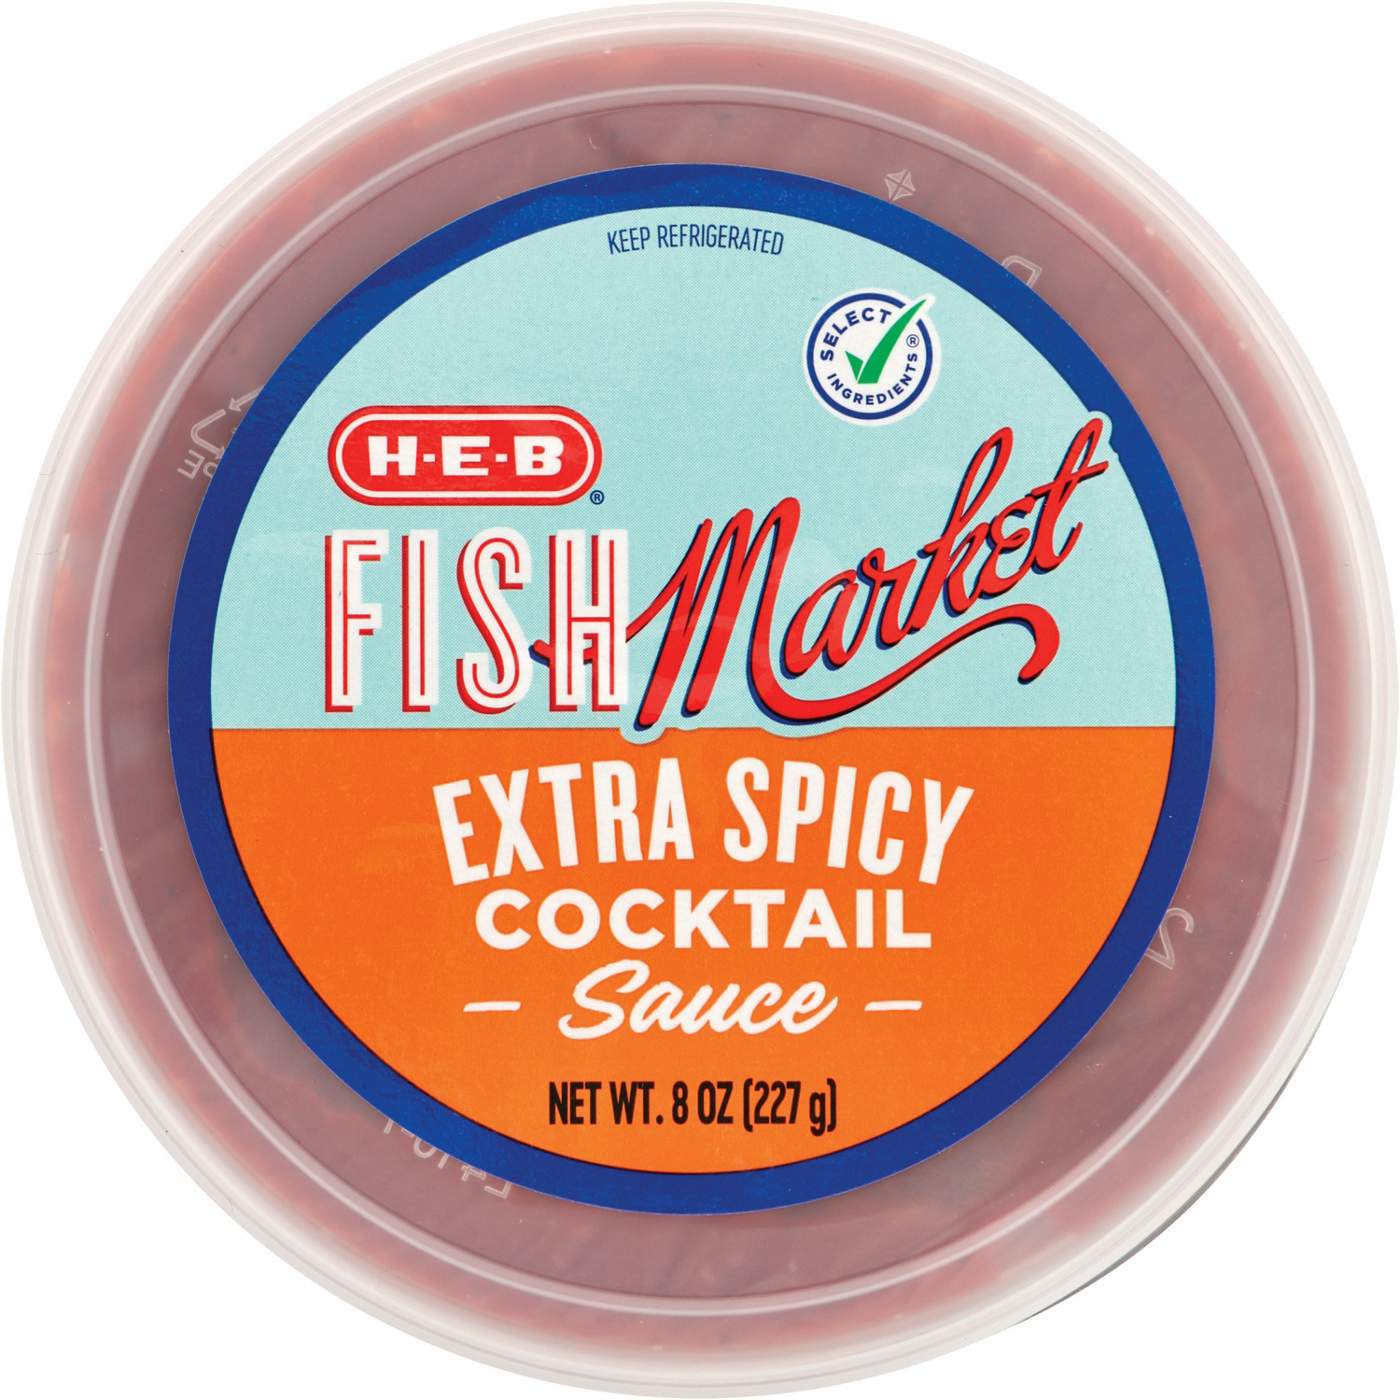 H-E-B Fish Market Extra Spicy Cocktail Sauce (Sold Cold); image 1 of 2